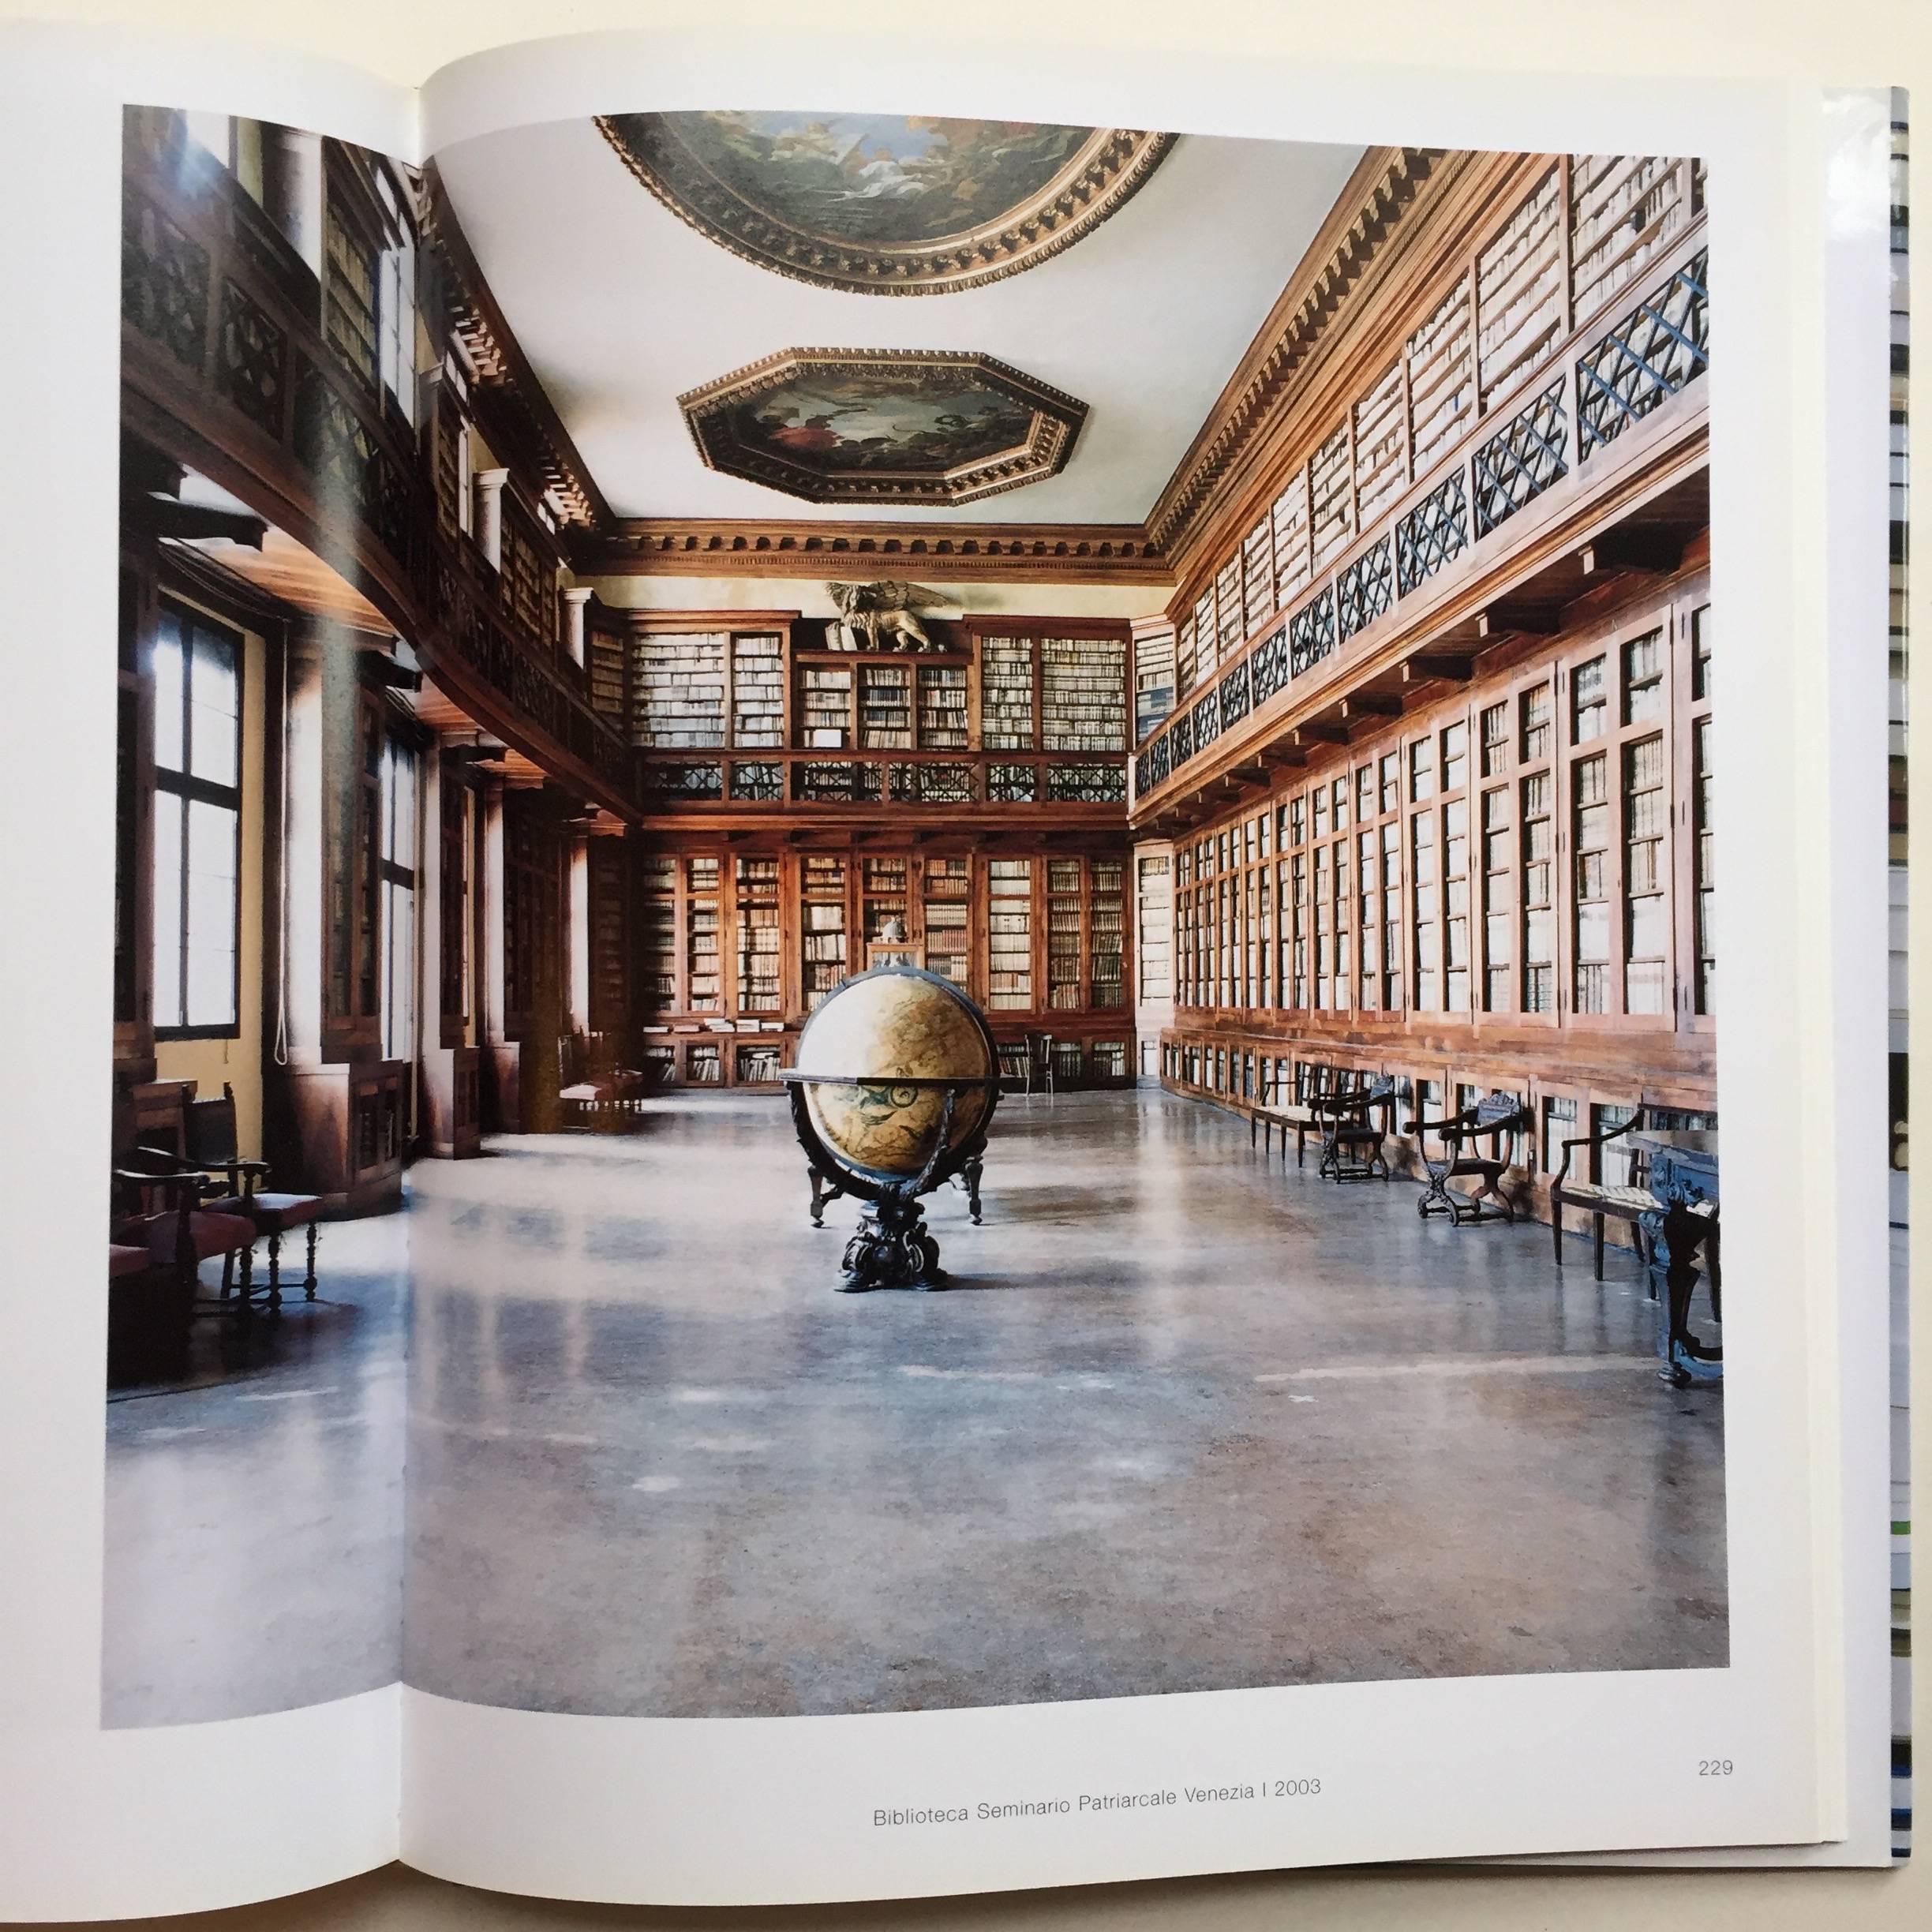 Contemporary Libraries - Candida Höfer and Umberto Eco - Thames & Hudson, 2006